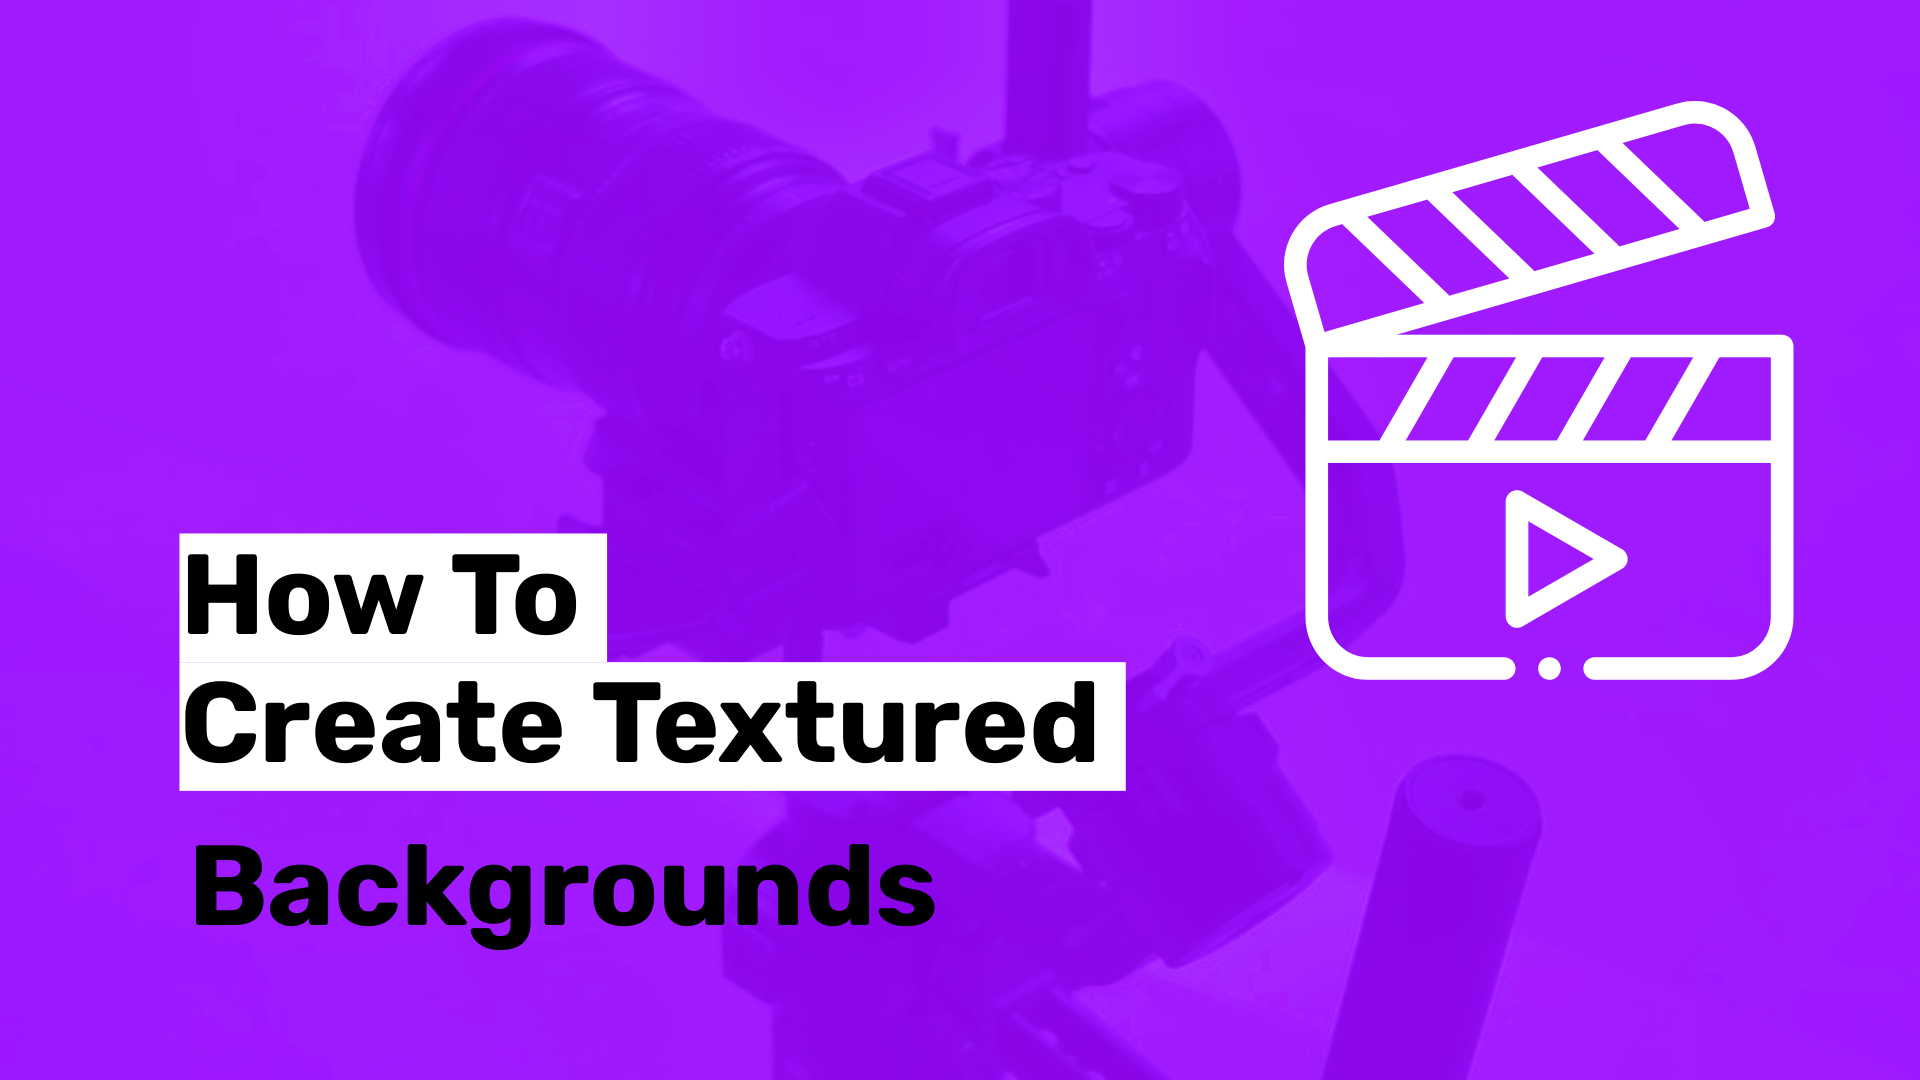 How to create textured backgrounds